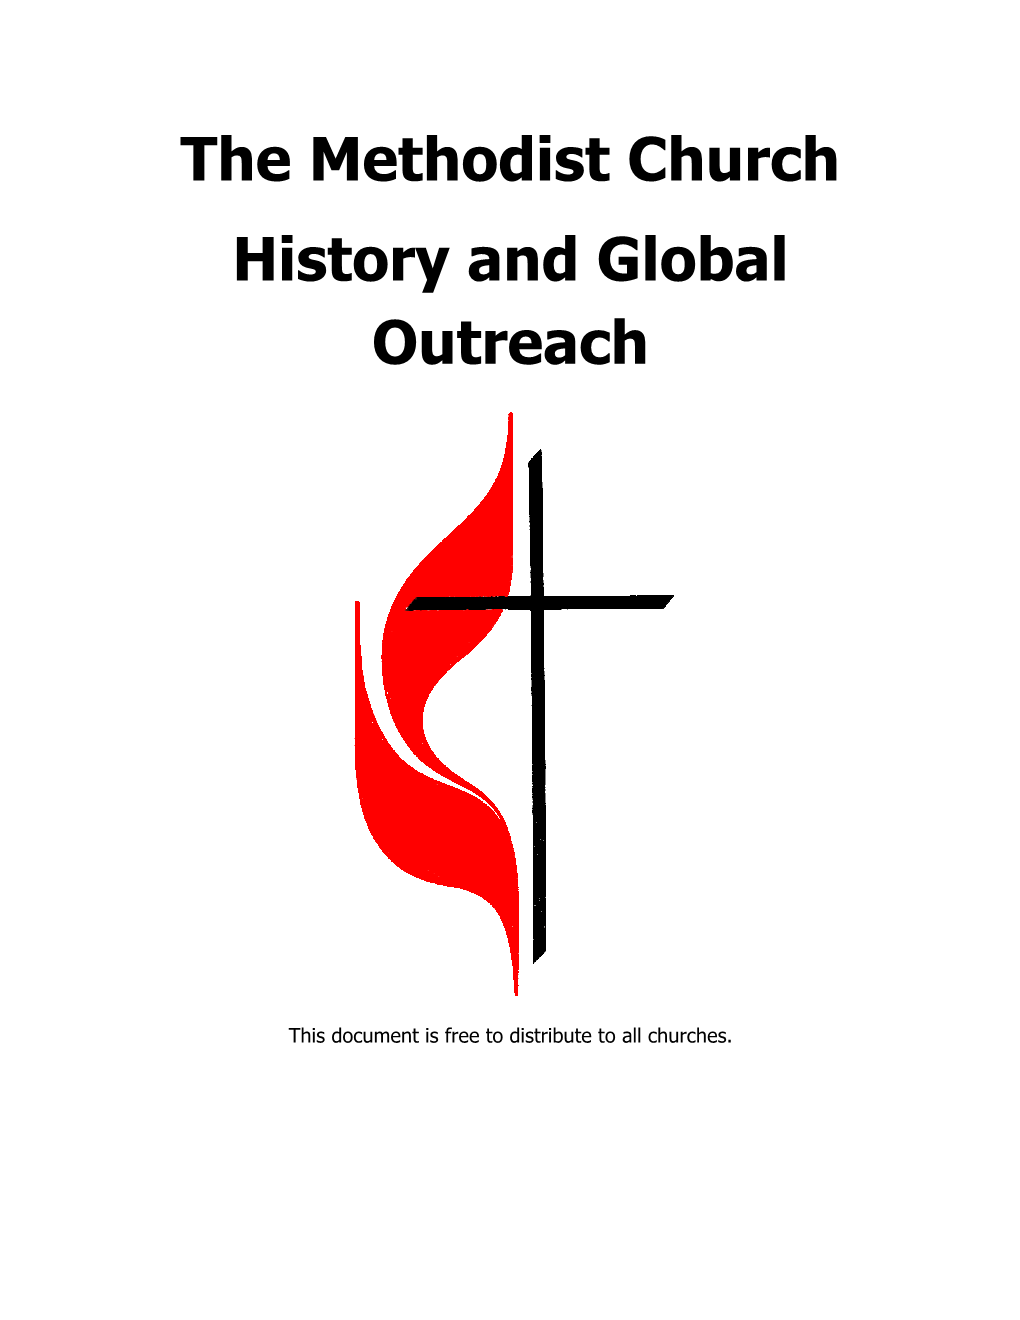 The Methodist Church History and Global Outreach